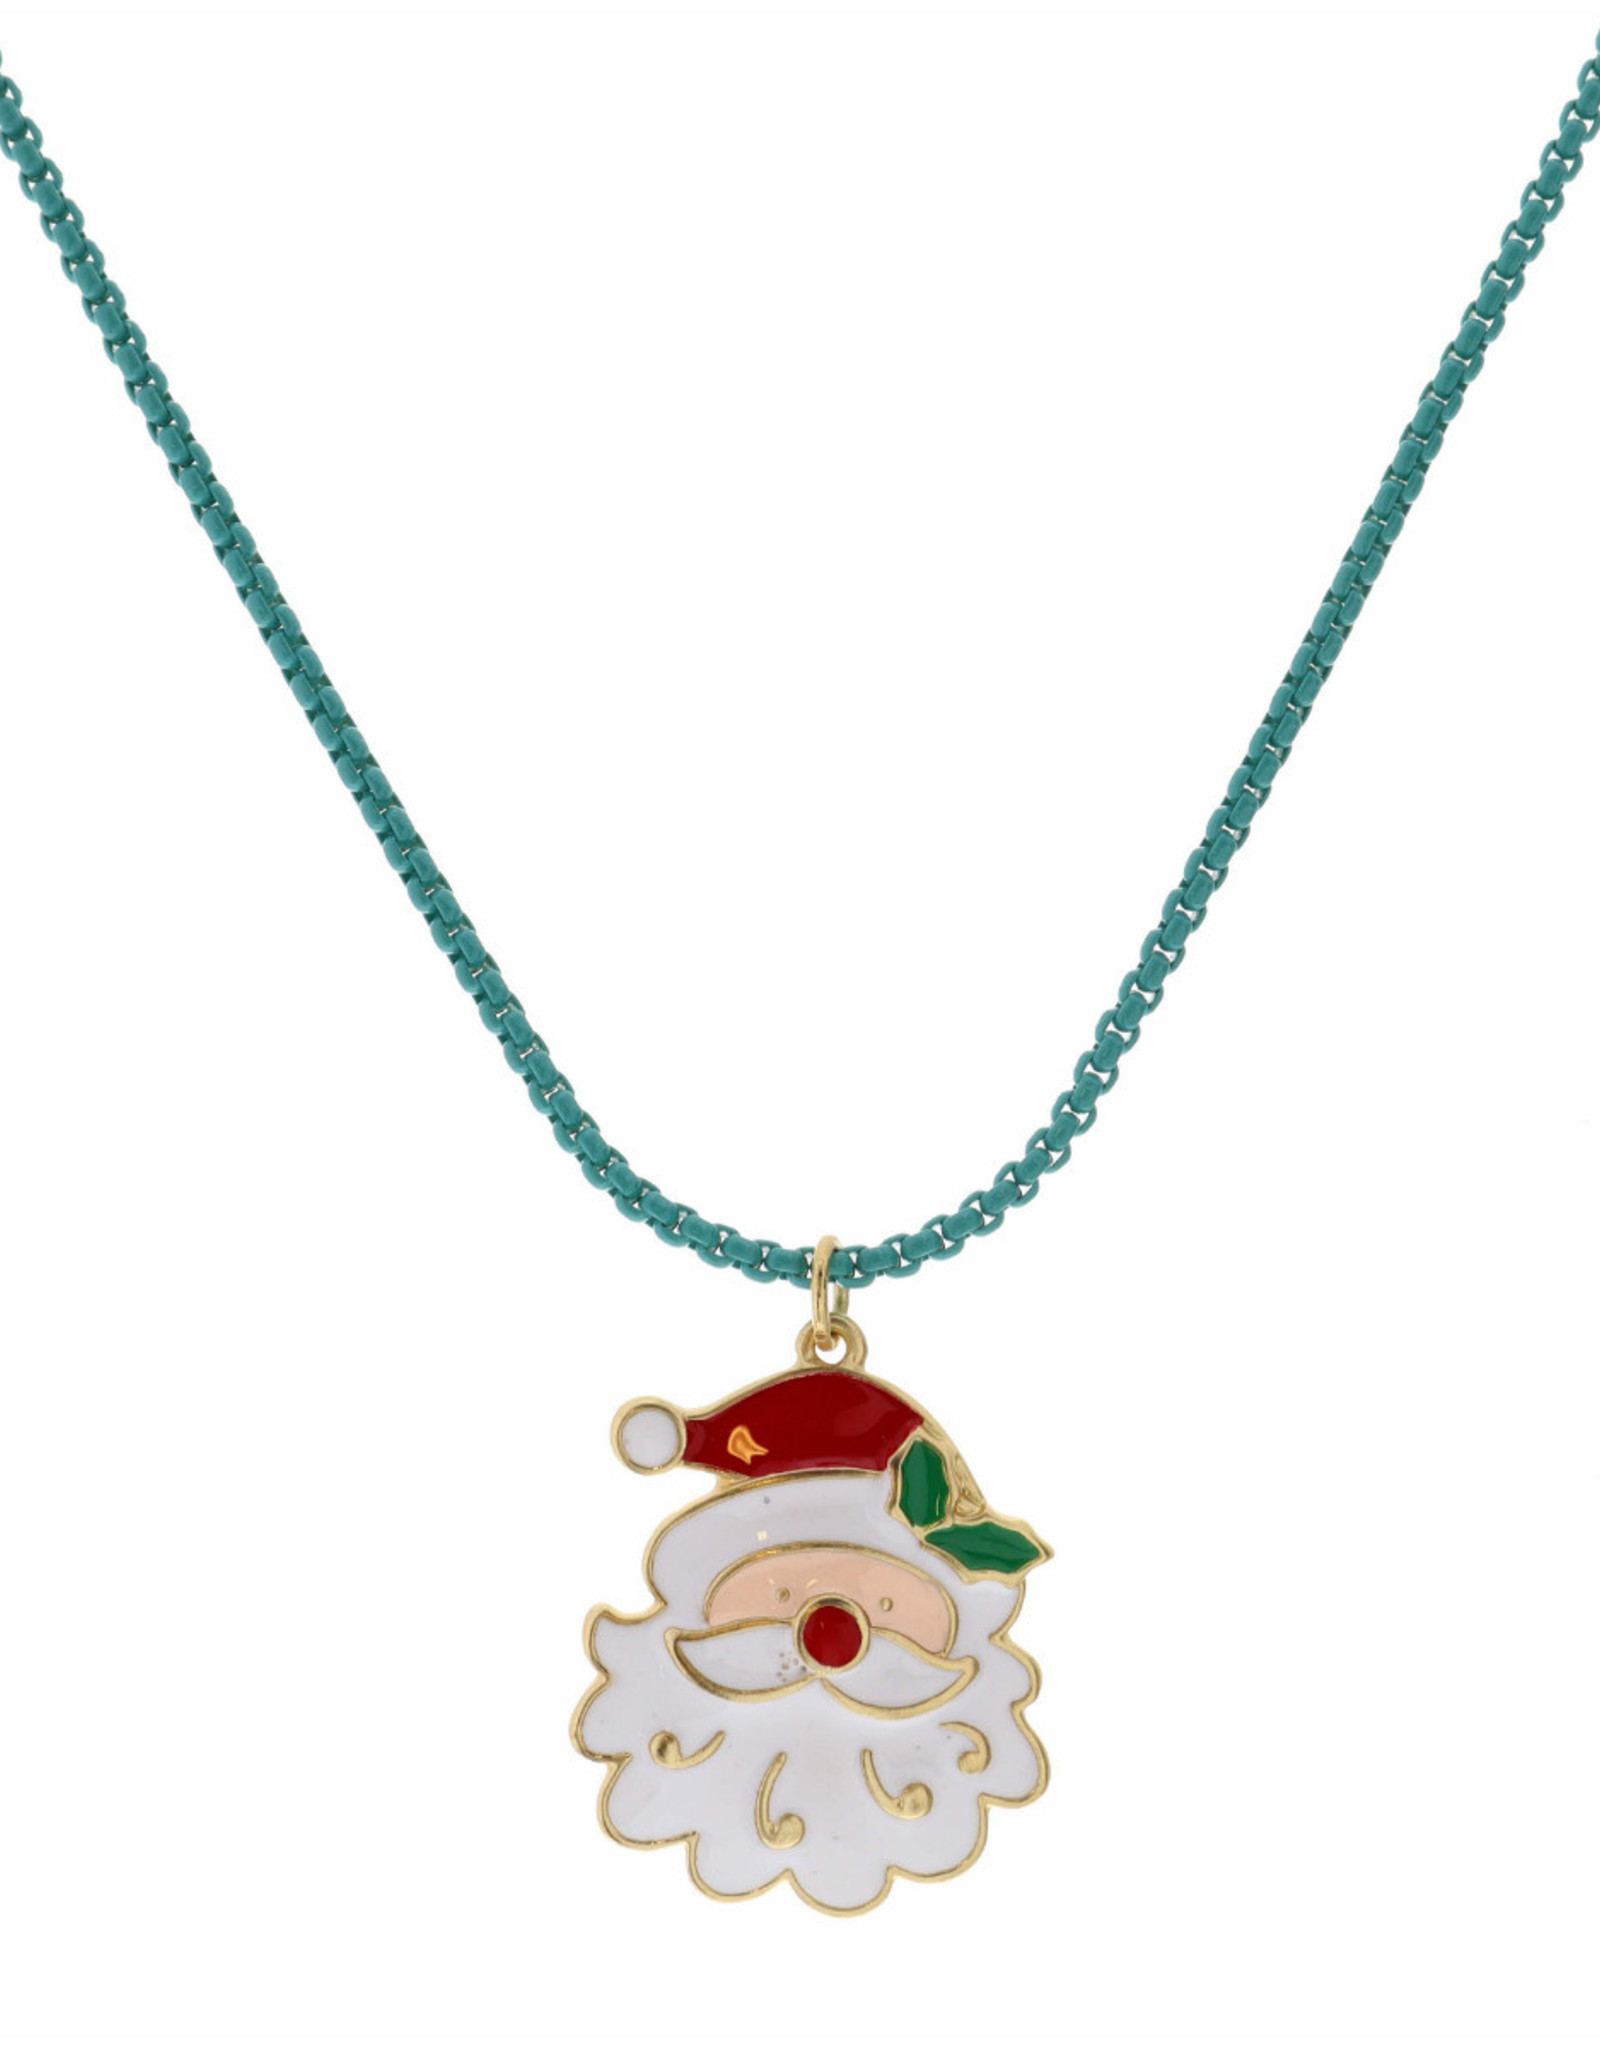 Girls Christmas Necklaces - various styles